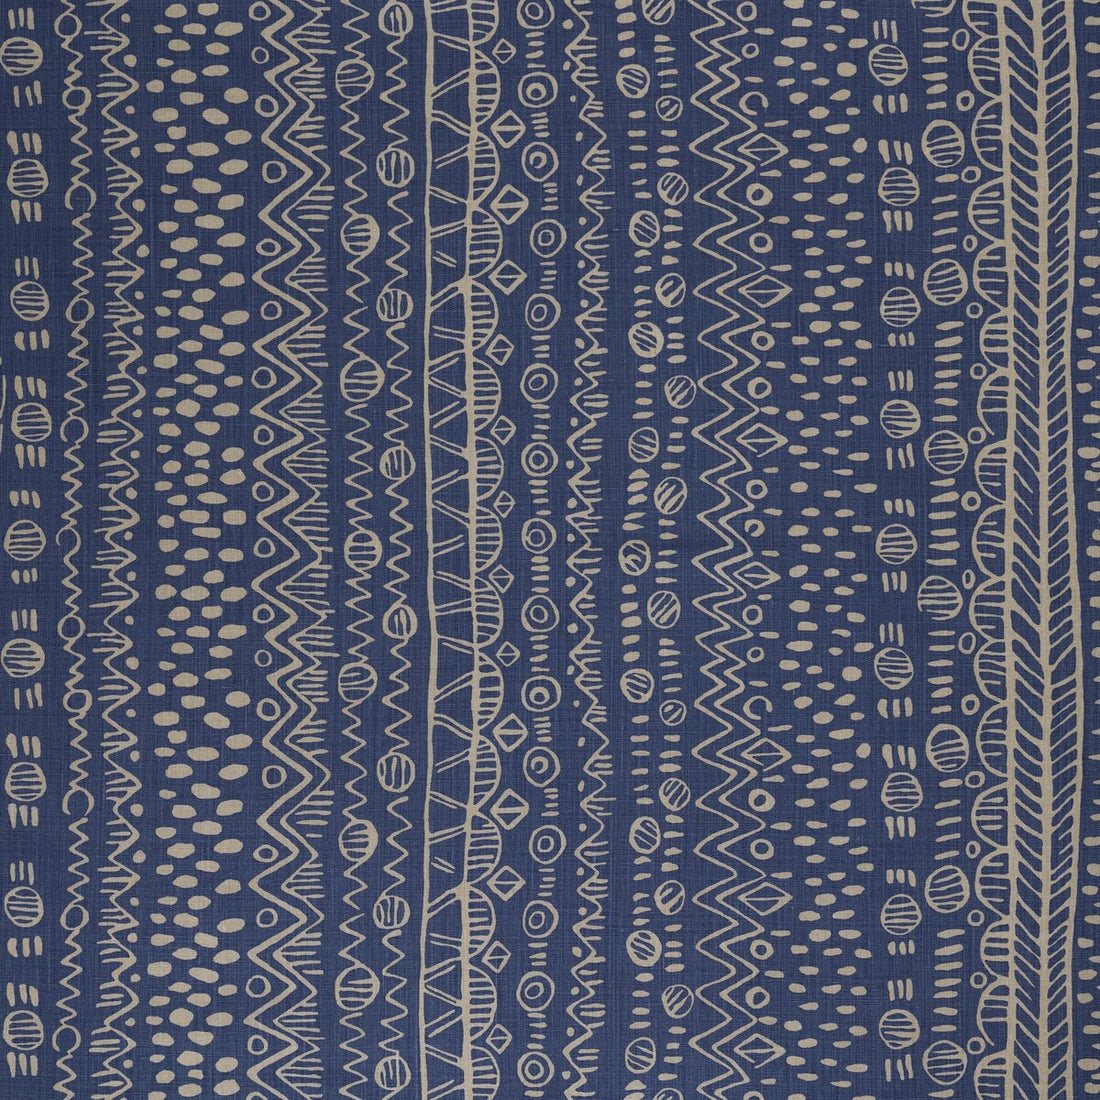 Chester fabric in azure color - pattern BFC-3664.5.0 - by Lee Jofa in the Blithfield collection